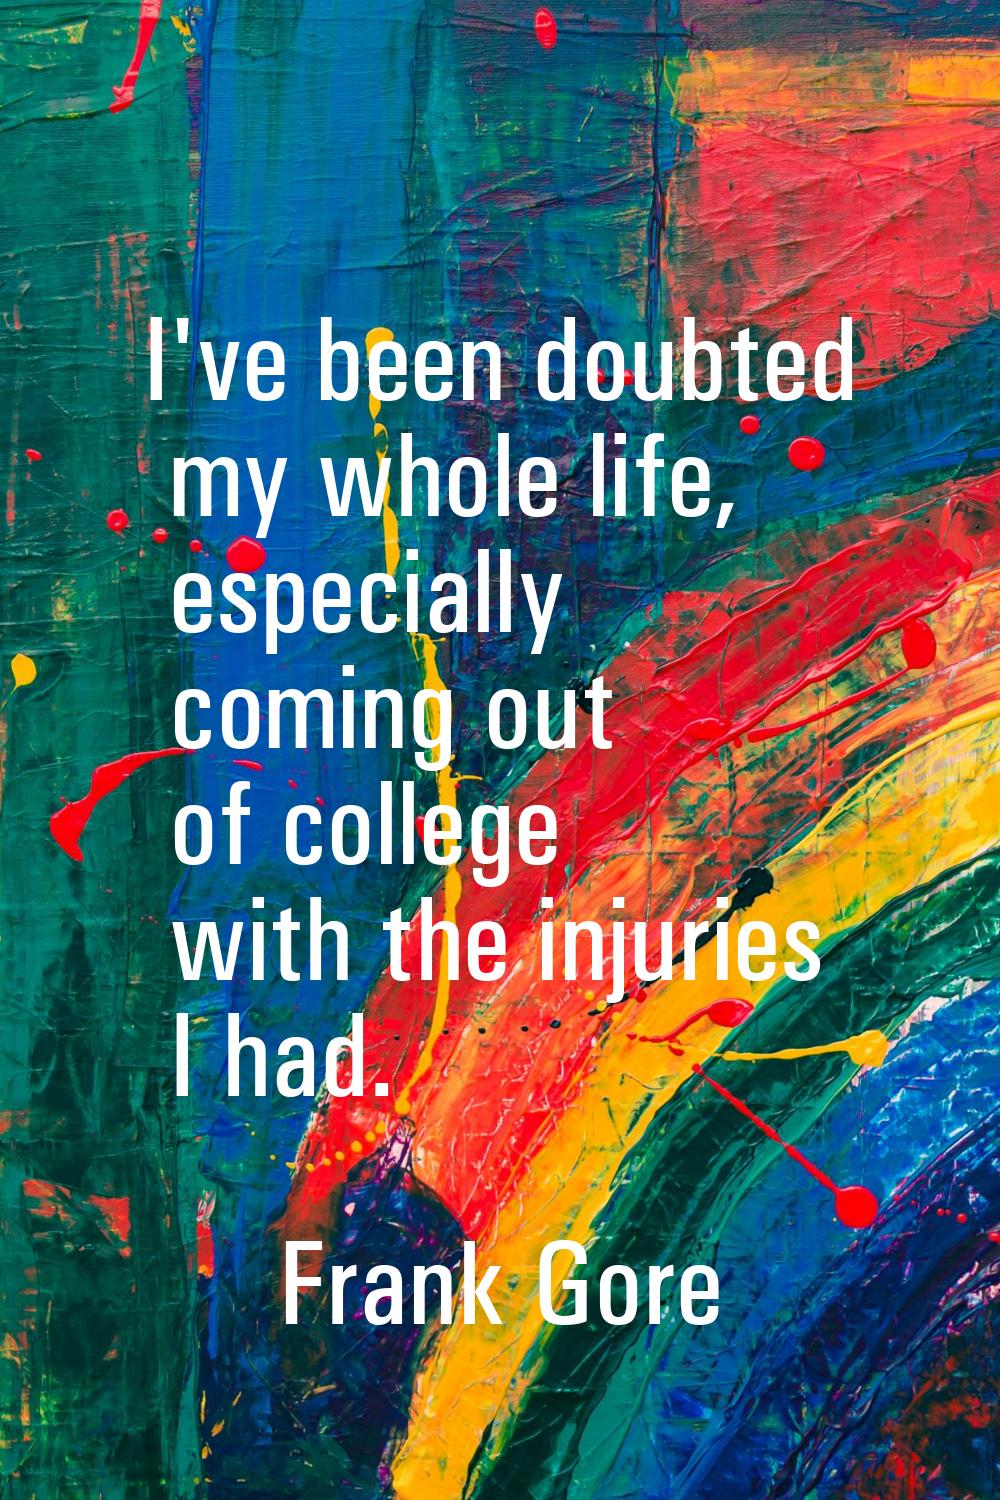 I've been doubted my whole life, especially coming out of college with the injuries I had.